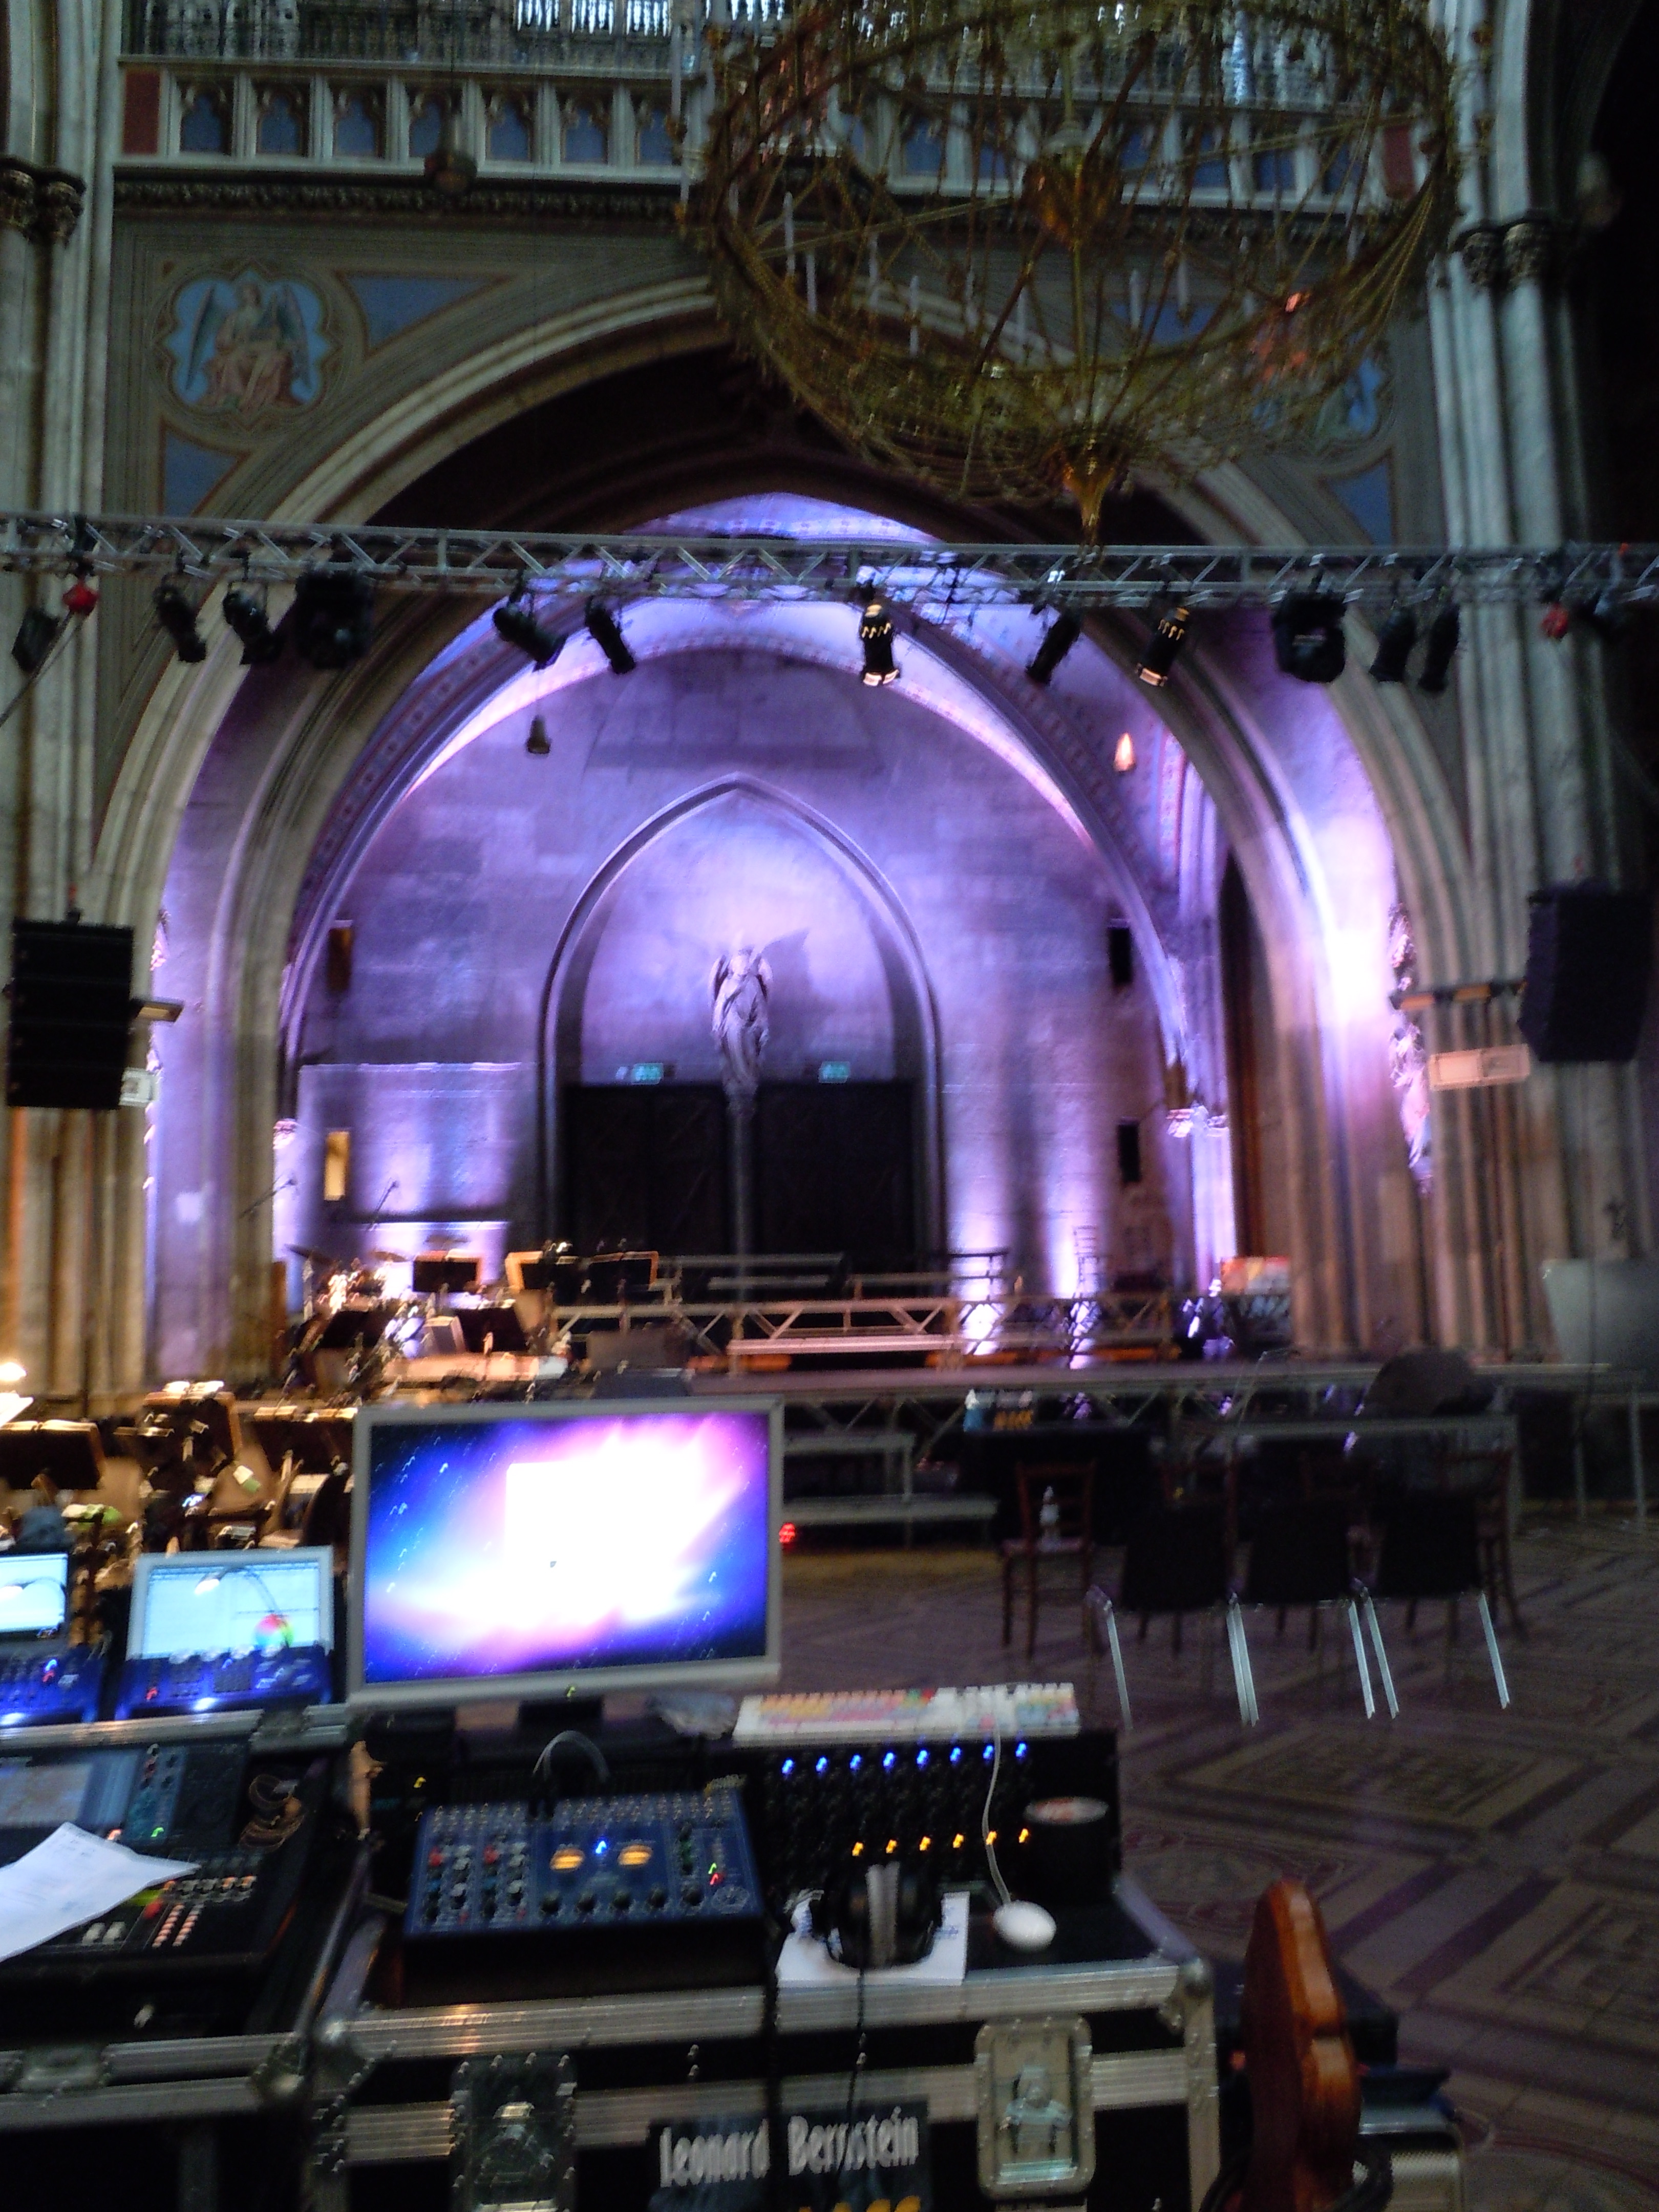 Church alcove lit up with purple lights behind imac and soundboard